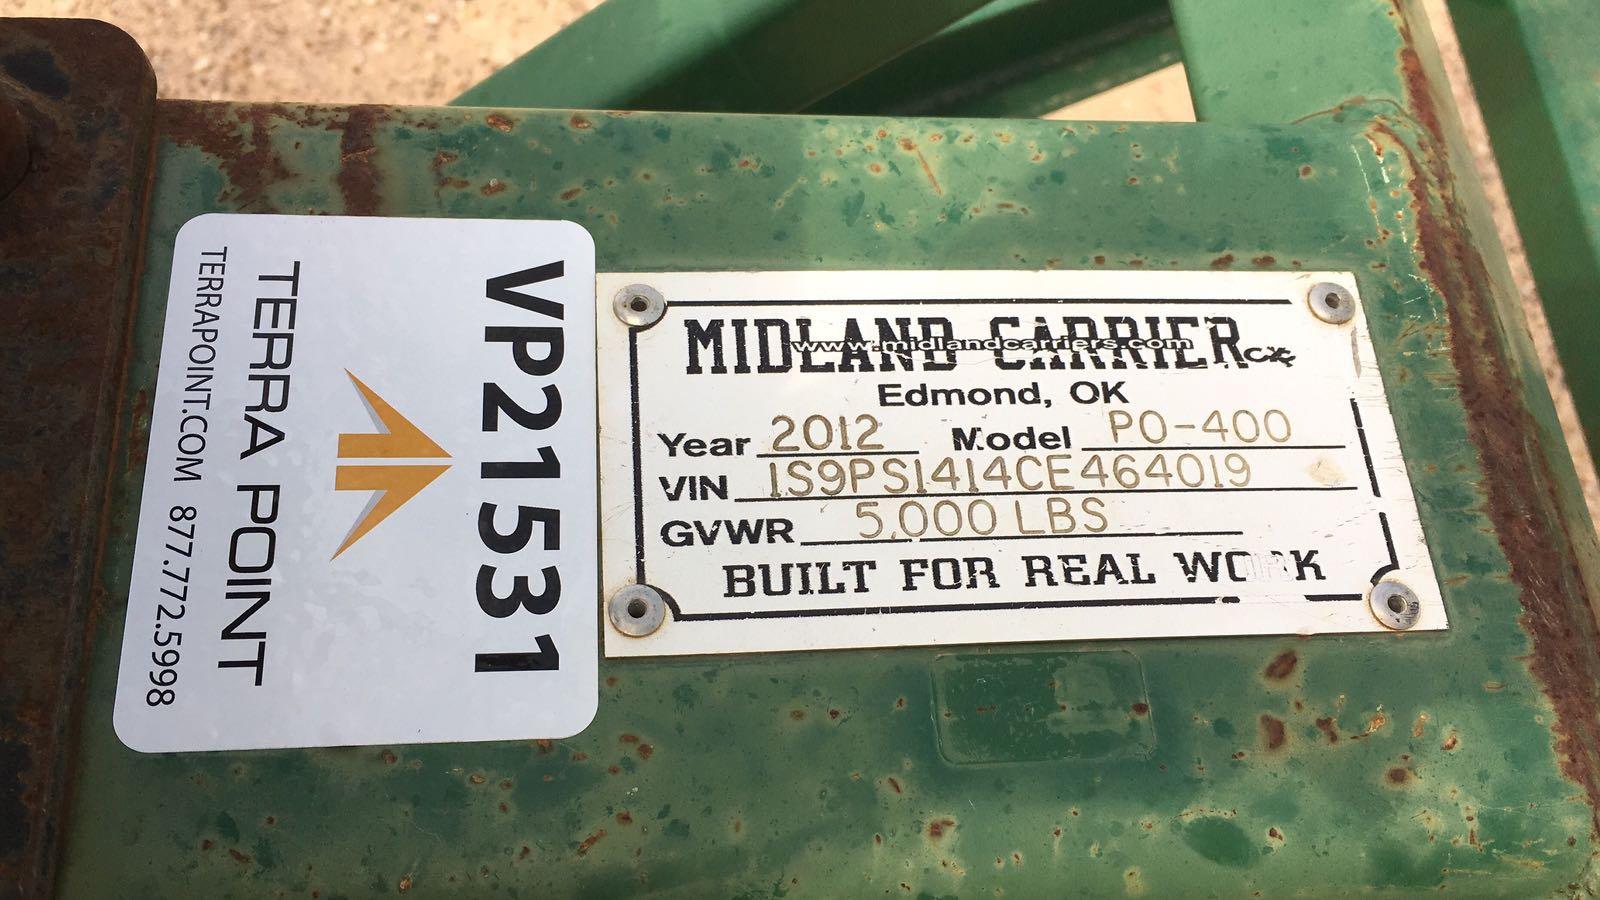 2012 Midland Carrier Model PO-400 Motorized Cable Puller | Video Available